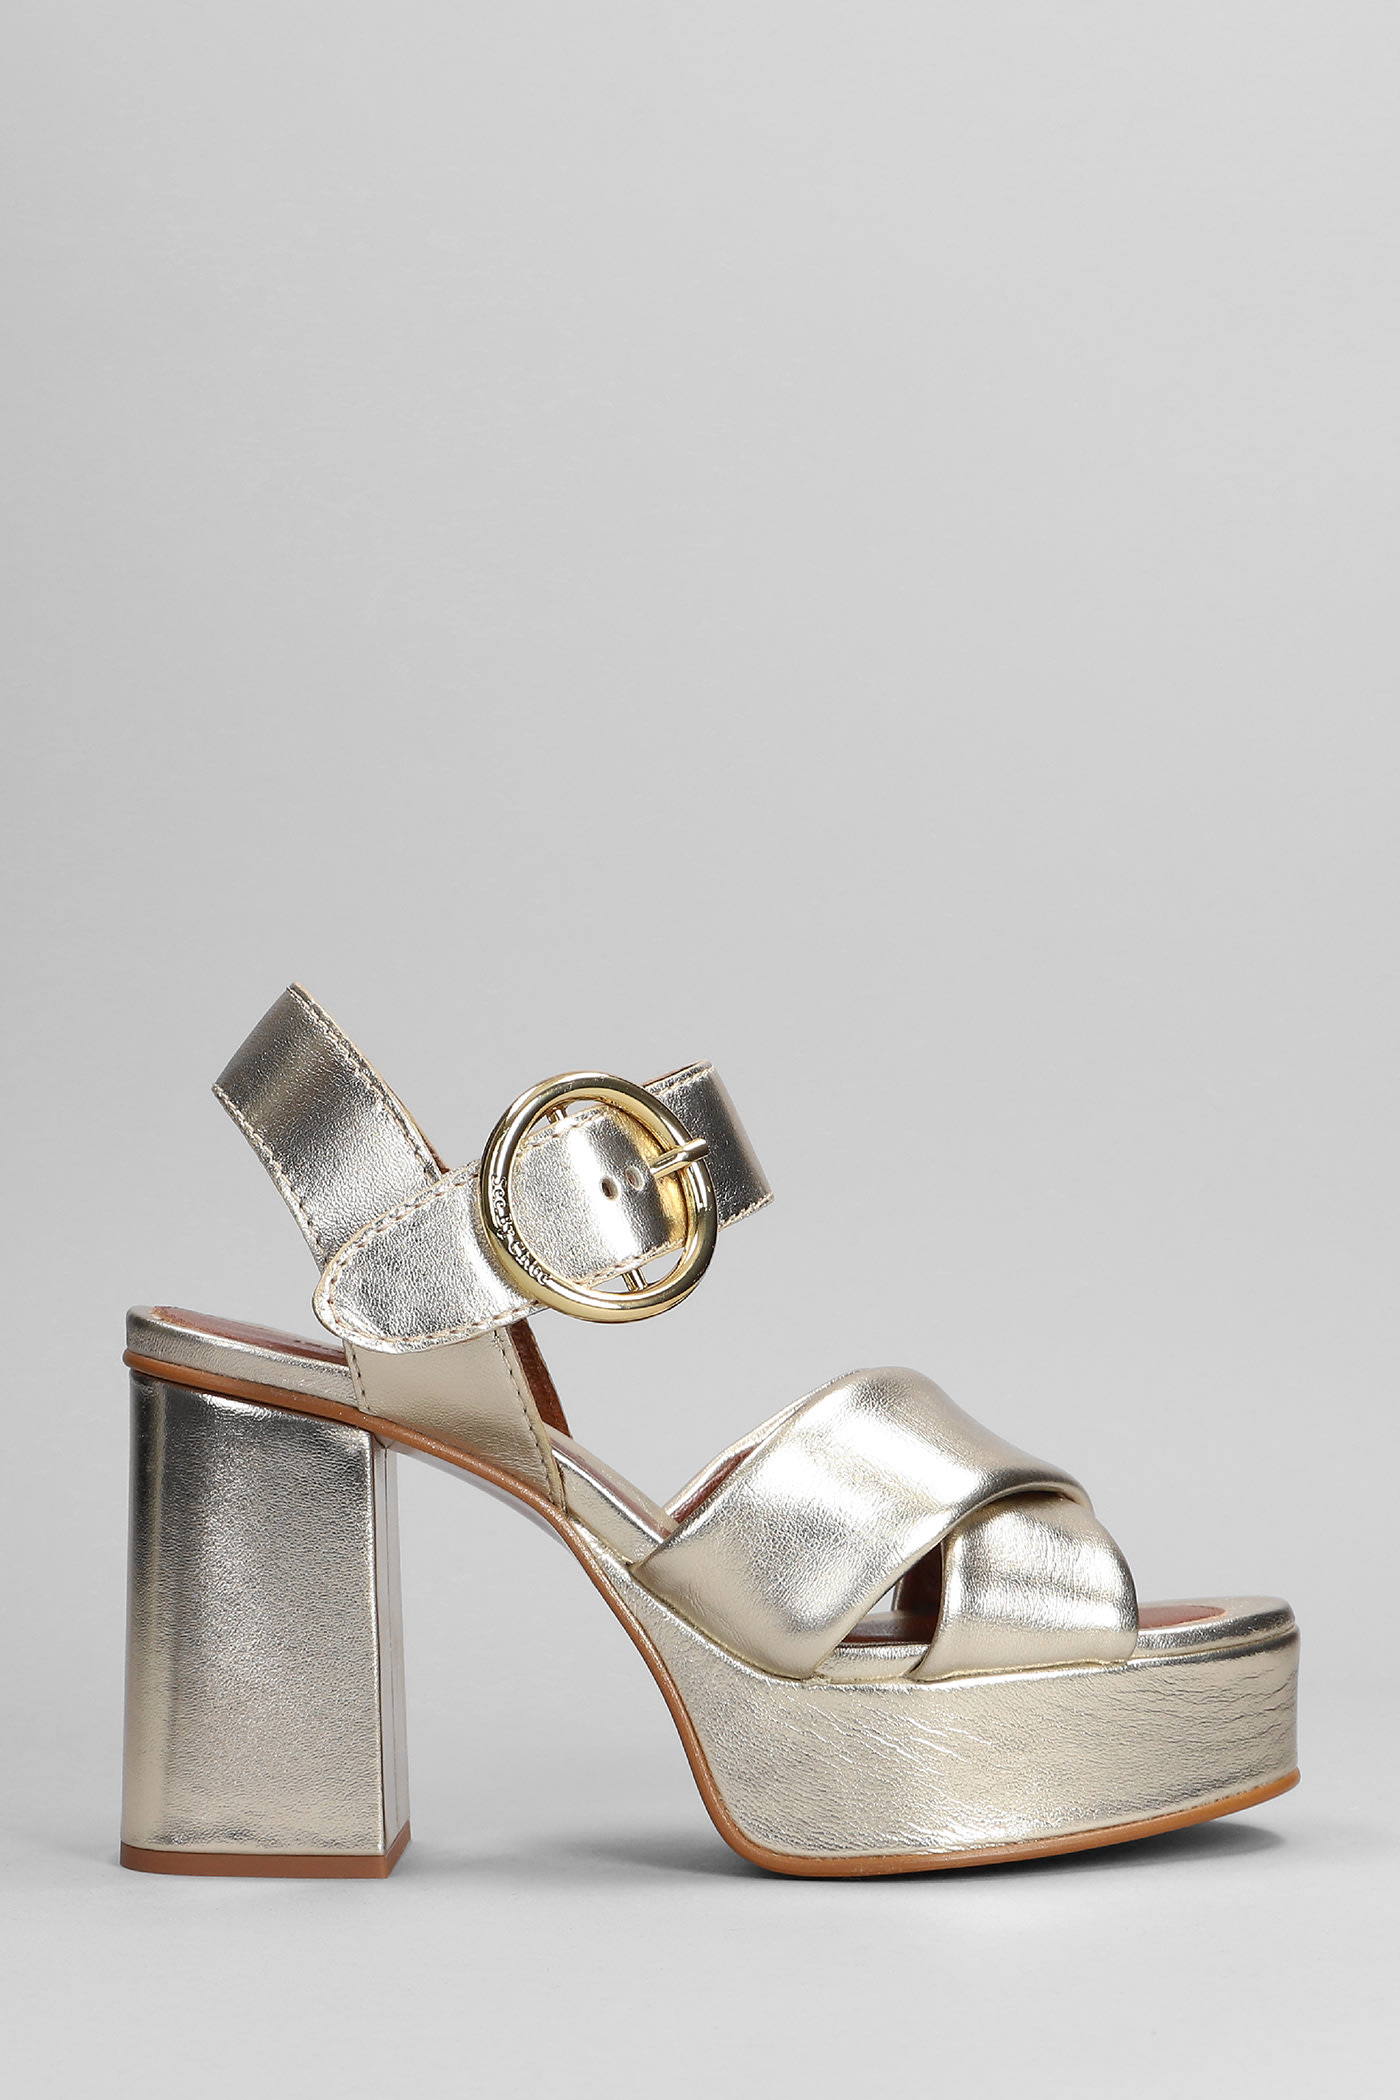 SEE BY CHLOÉ LYNA SANDALS IN PLATINUM LEATHER